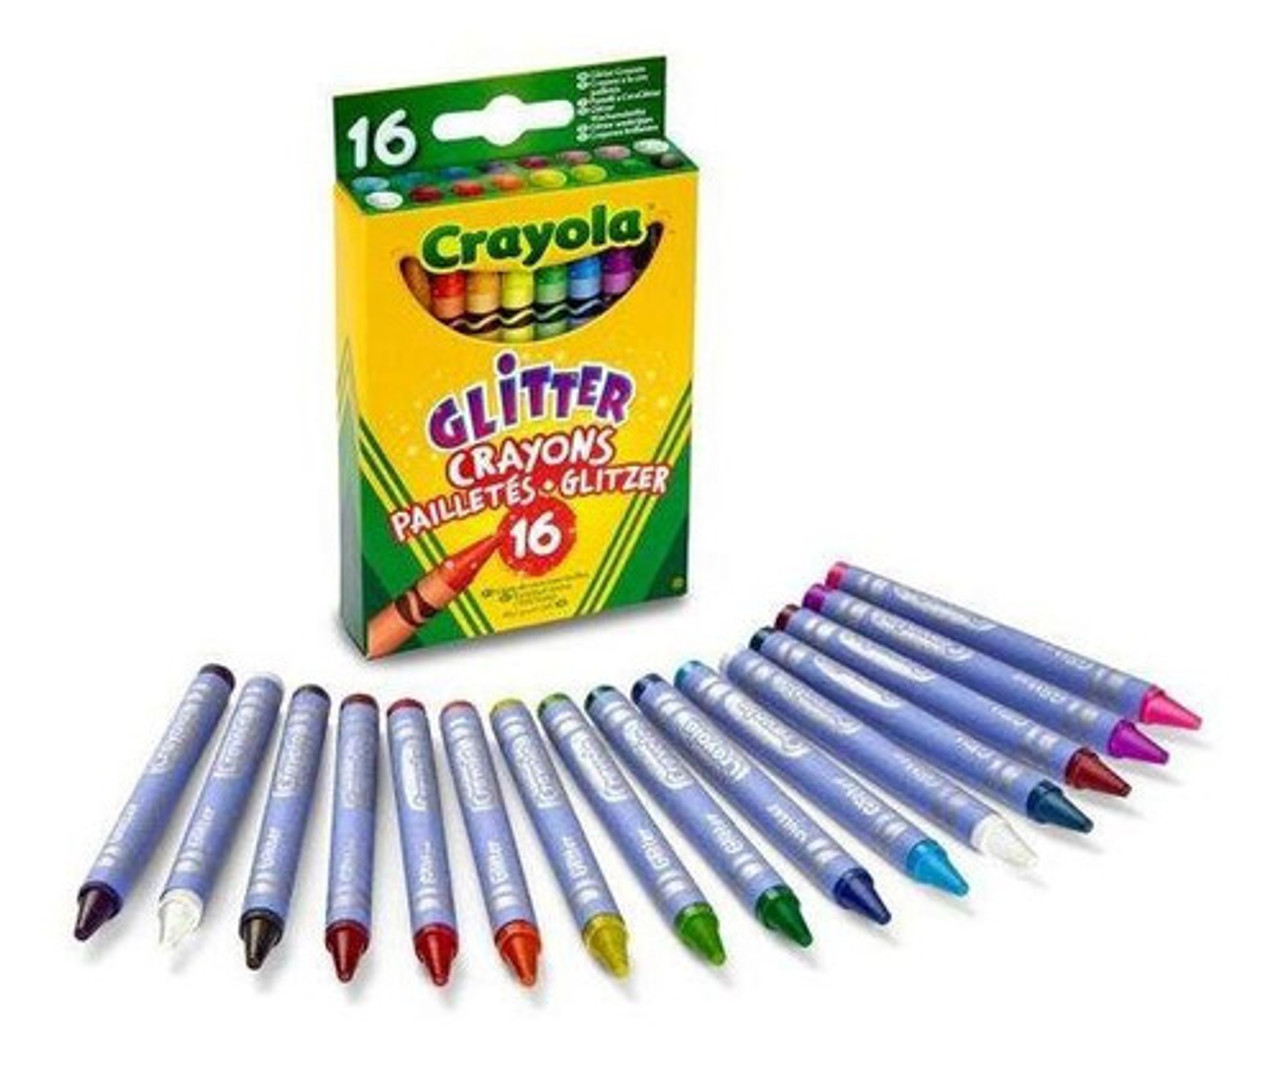 Crayola Glitter Crayons, 16 Count, Assorted Colors, Ideal For Home